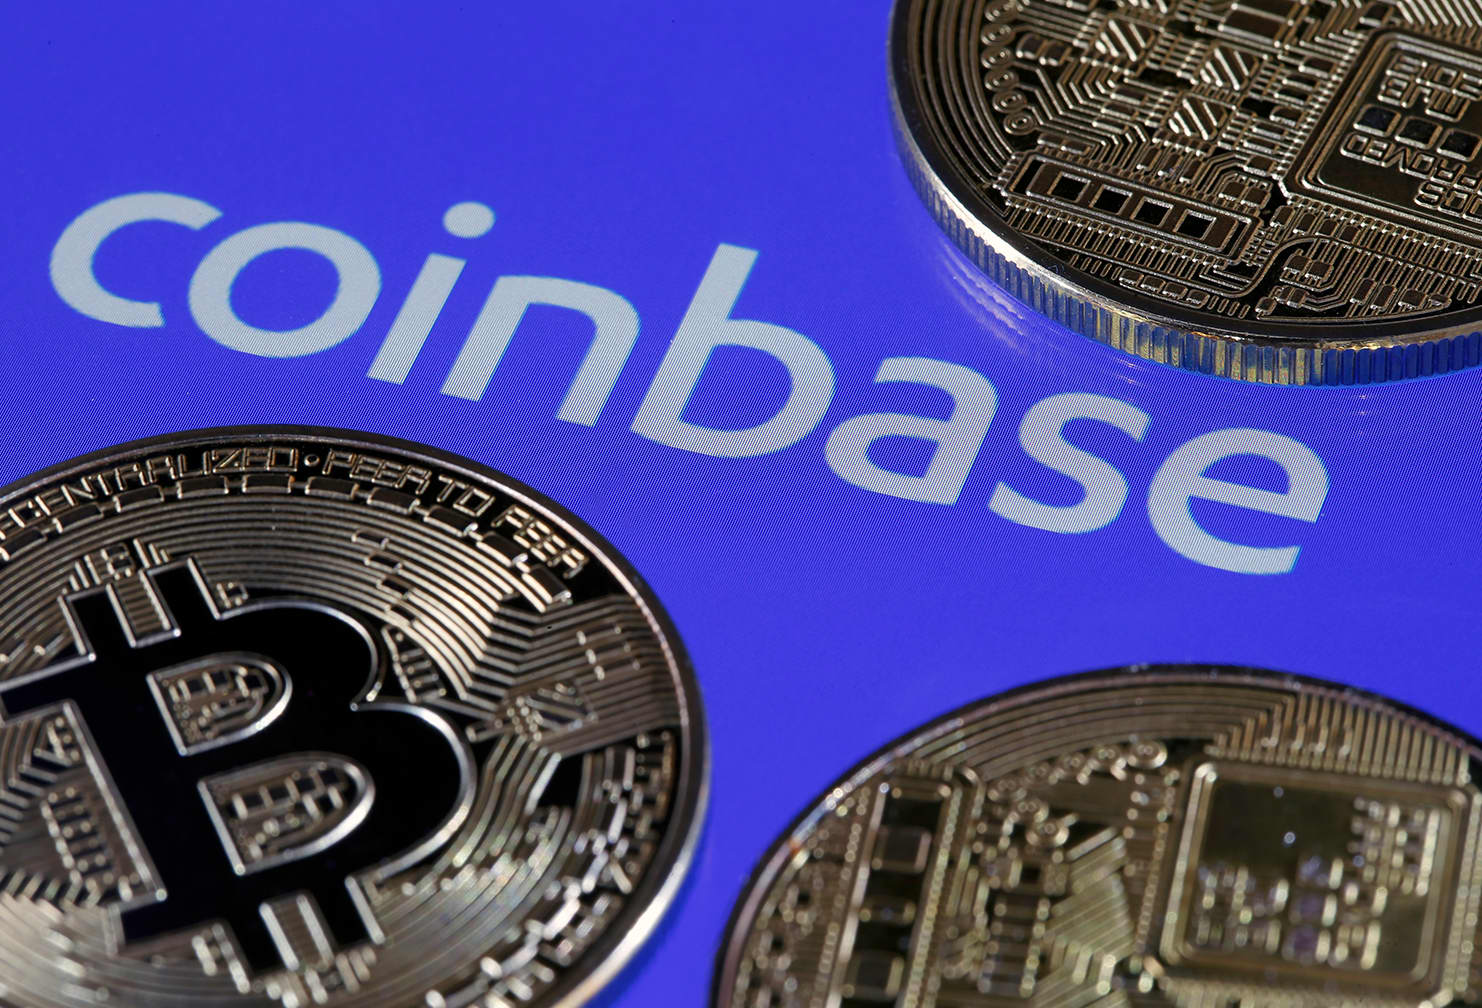 Bitcoin and ether stand ground this week while altcoins tumble on the SEC's Coinbase crackdown